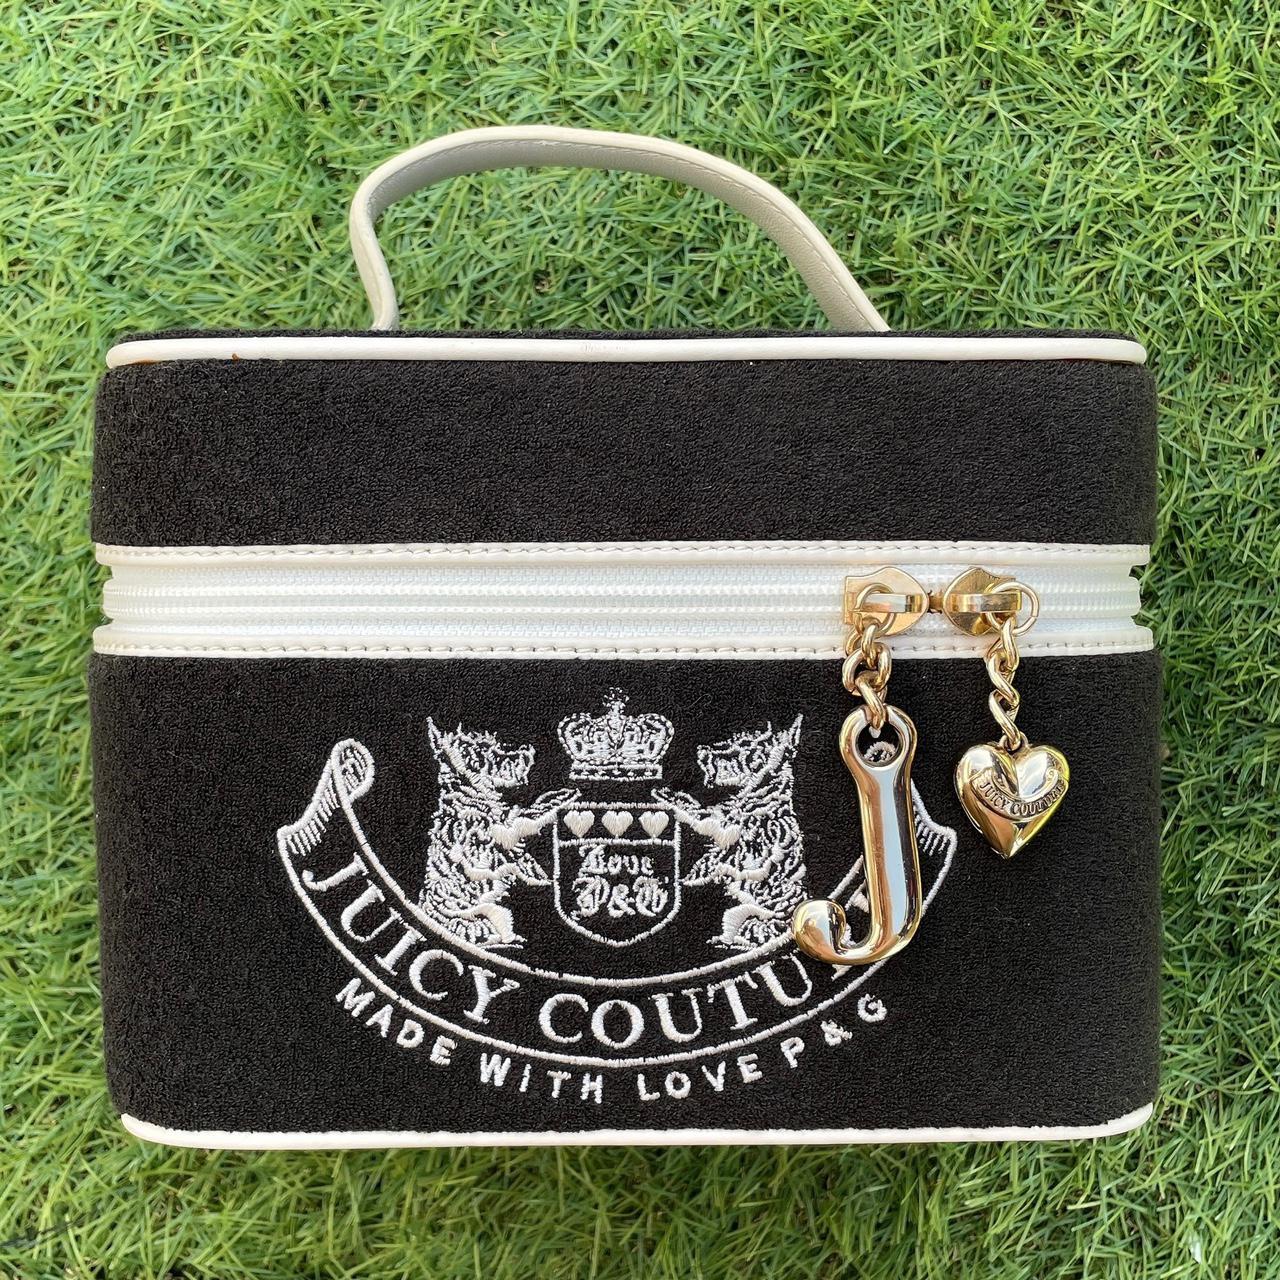 Product Image 1 - ♣️🖤♠️
Juicy Couture plush cosmetic train